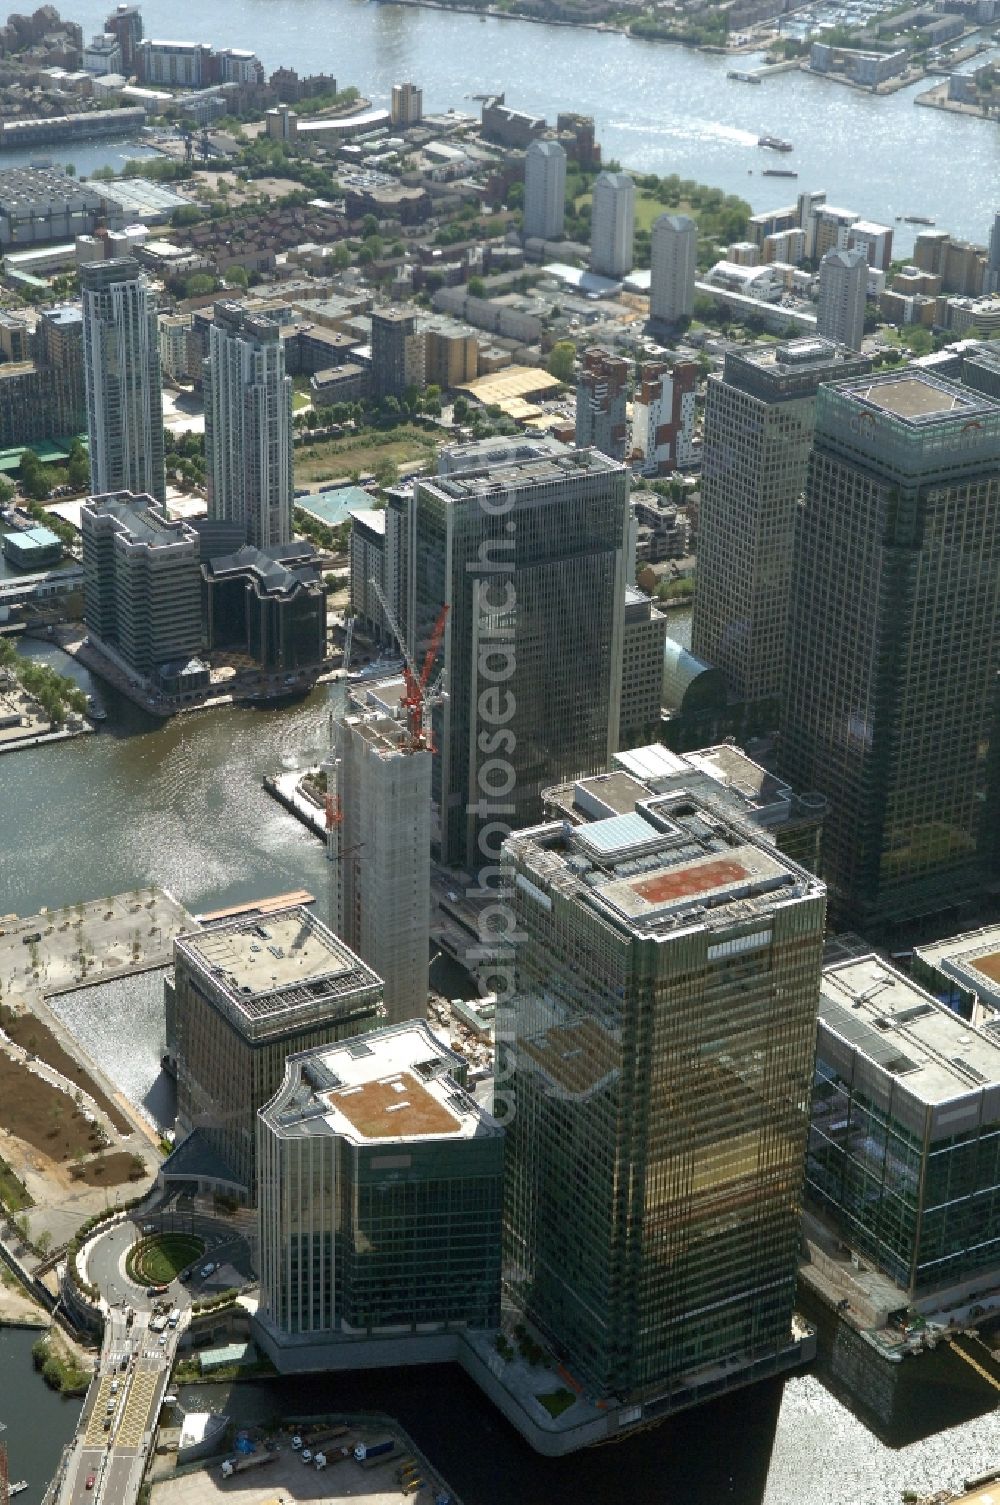 Aerial image Canary Wharf - Partial view of the complex of office buildings Canary Wharf in London. The complex is located on the Isle of Dogs in the borough of London Borough of Tower Hamlets in the heart of the Docklands, the former port area of London. From 1981 on, companies settled there. Today, the construction is used by companies, such as the financial institution HSBC and the media company The Daily Paragraph